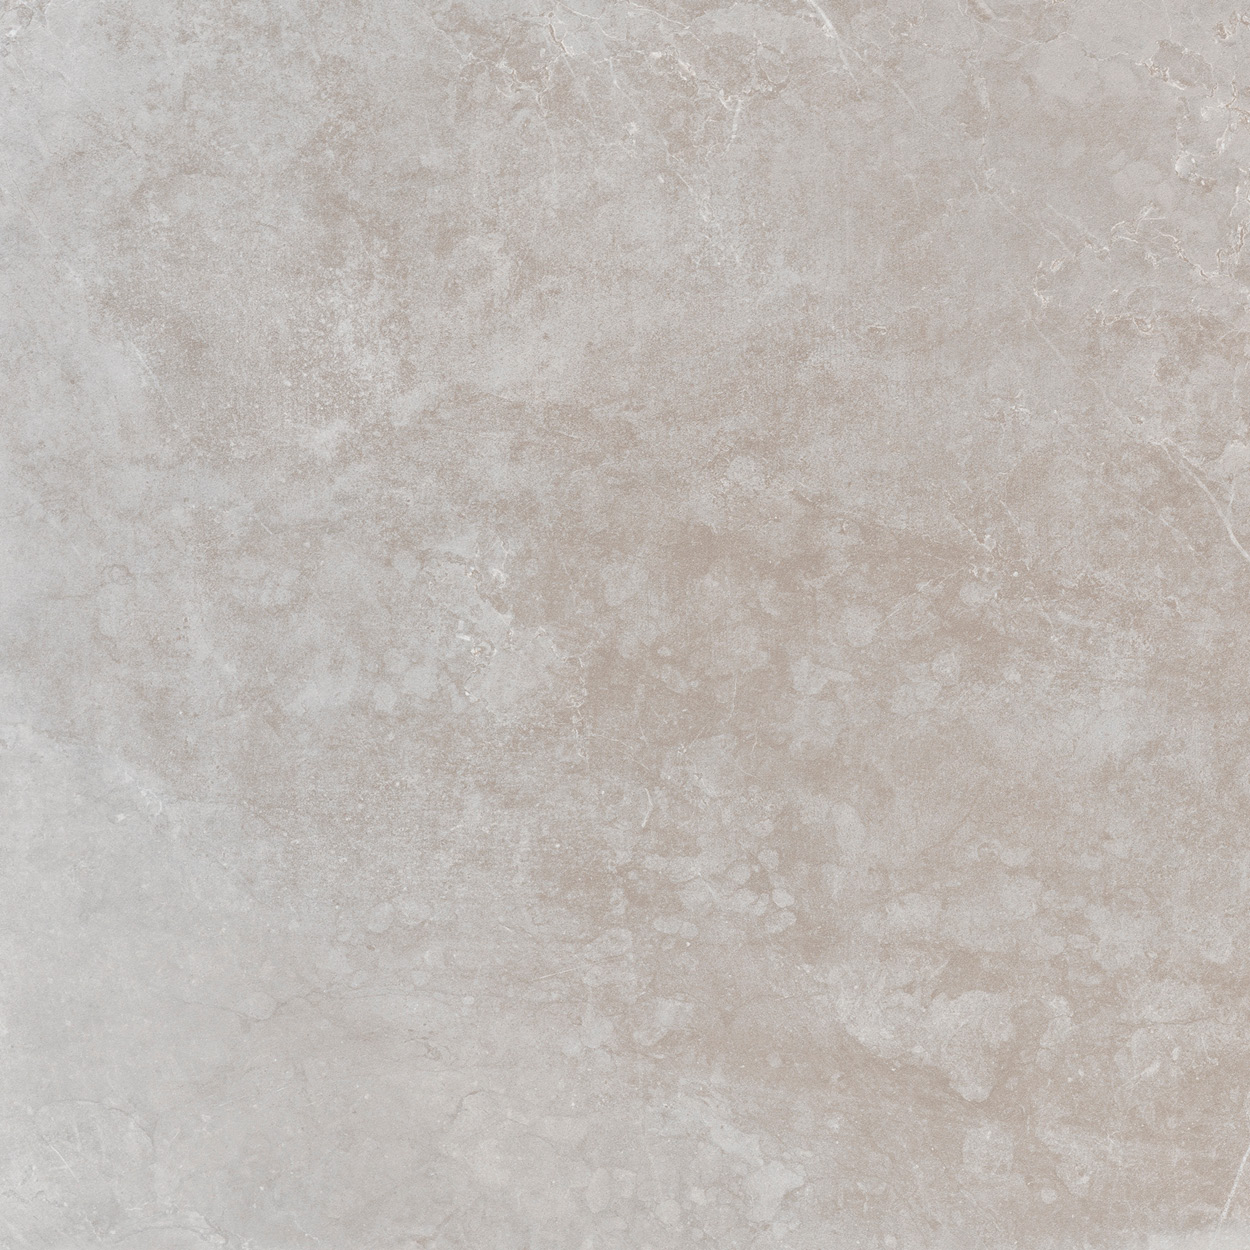 24 x 24 Evo Stone Mist Honed finished Rectified Porcelain Tile (SPECIAL ORDER ONLY)